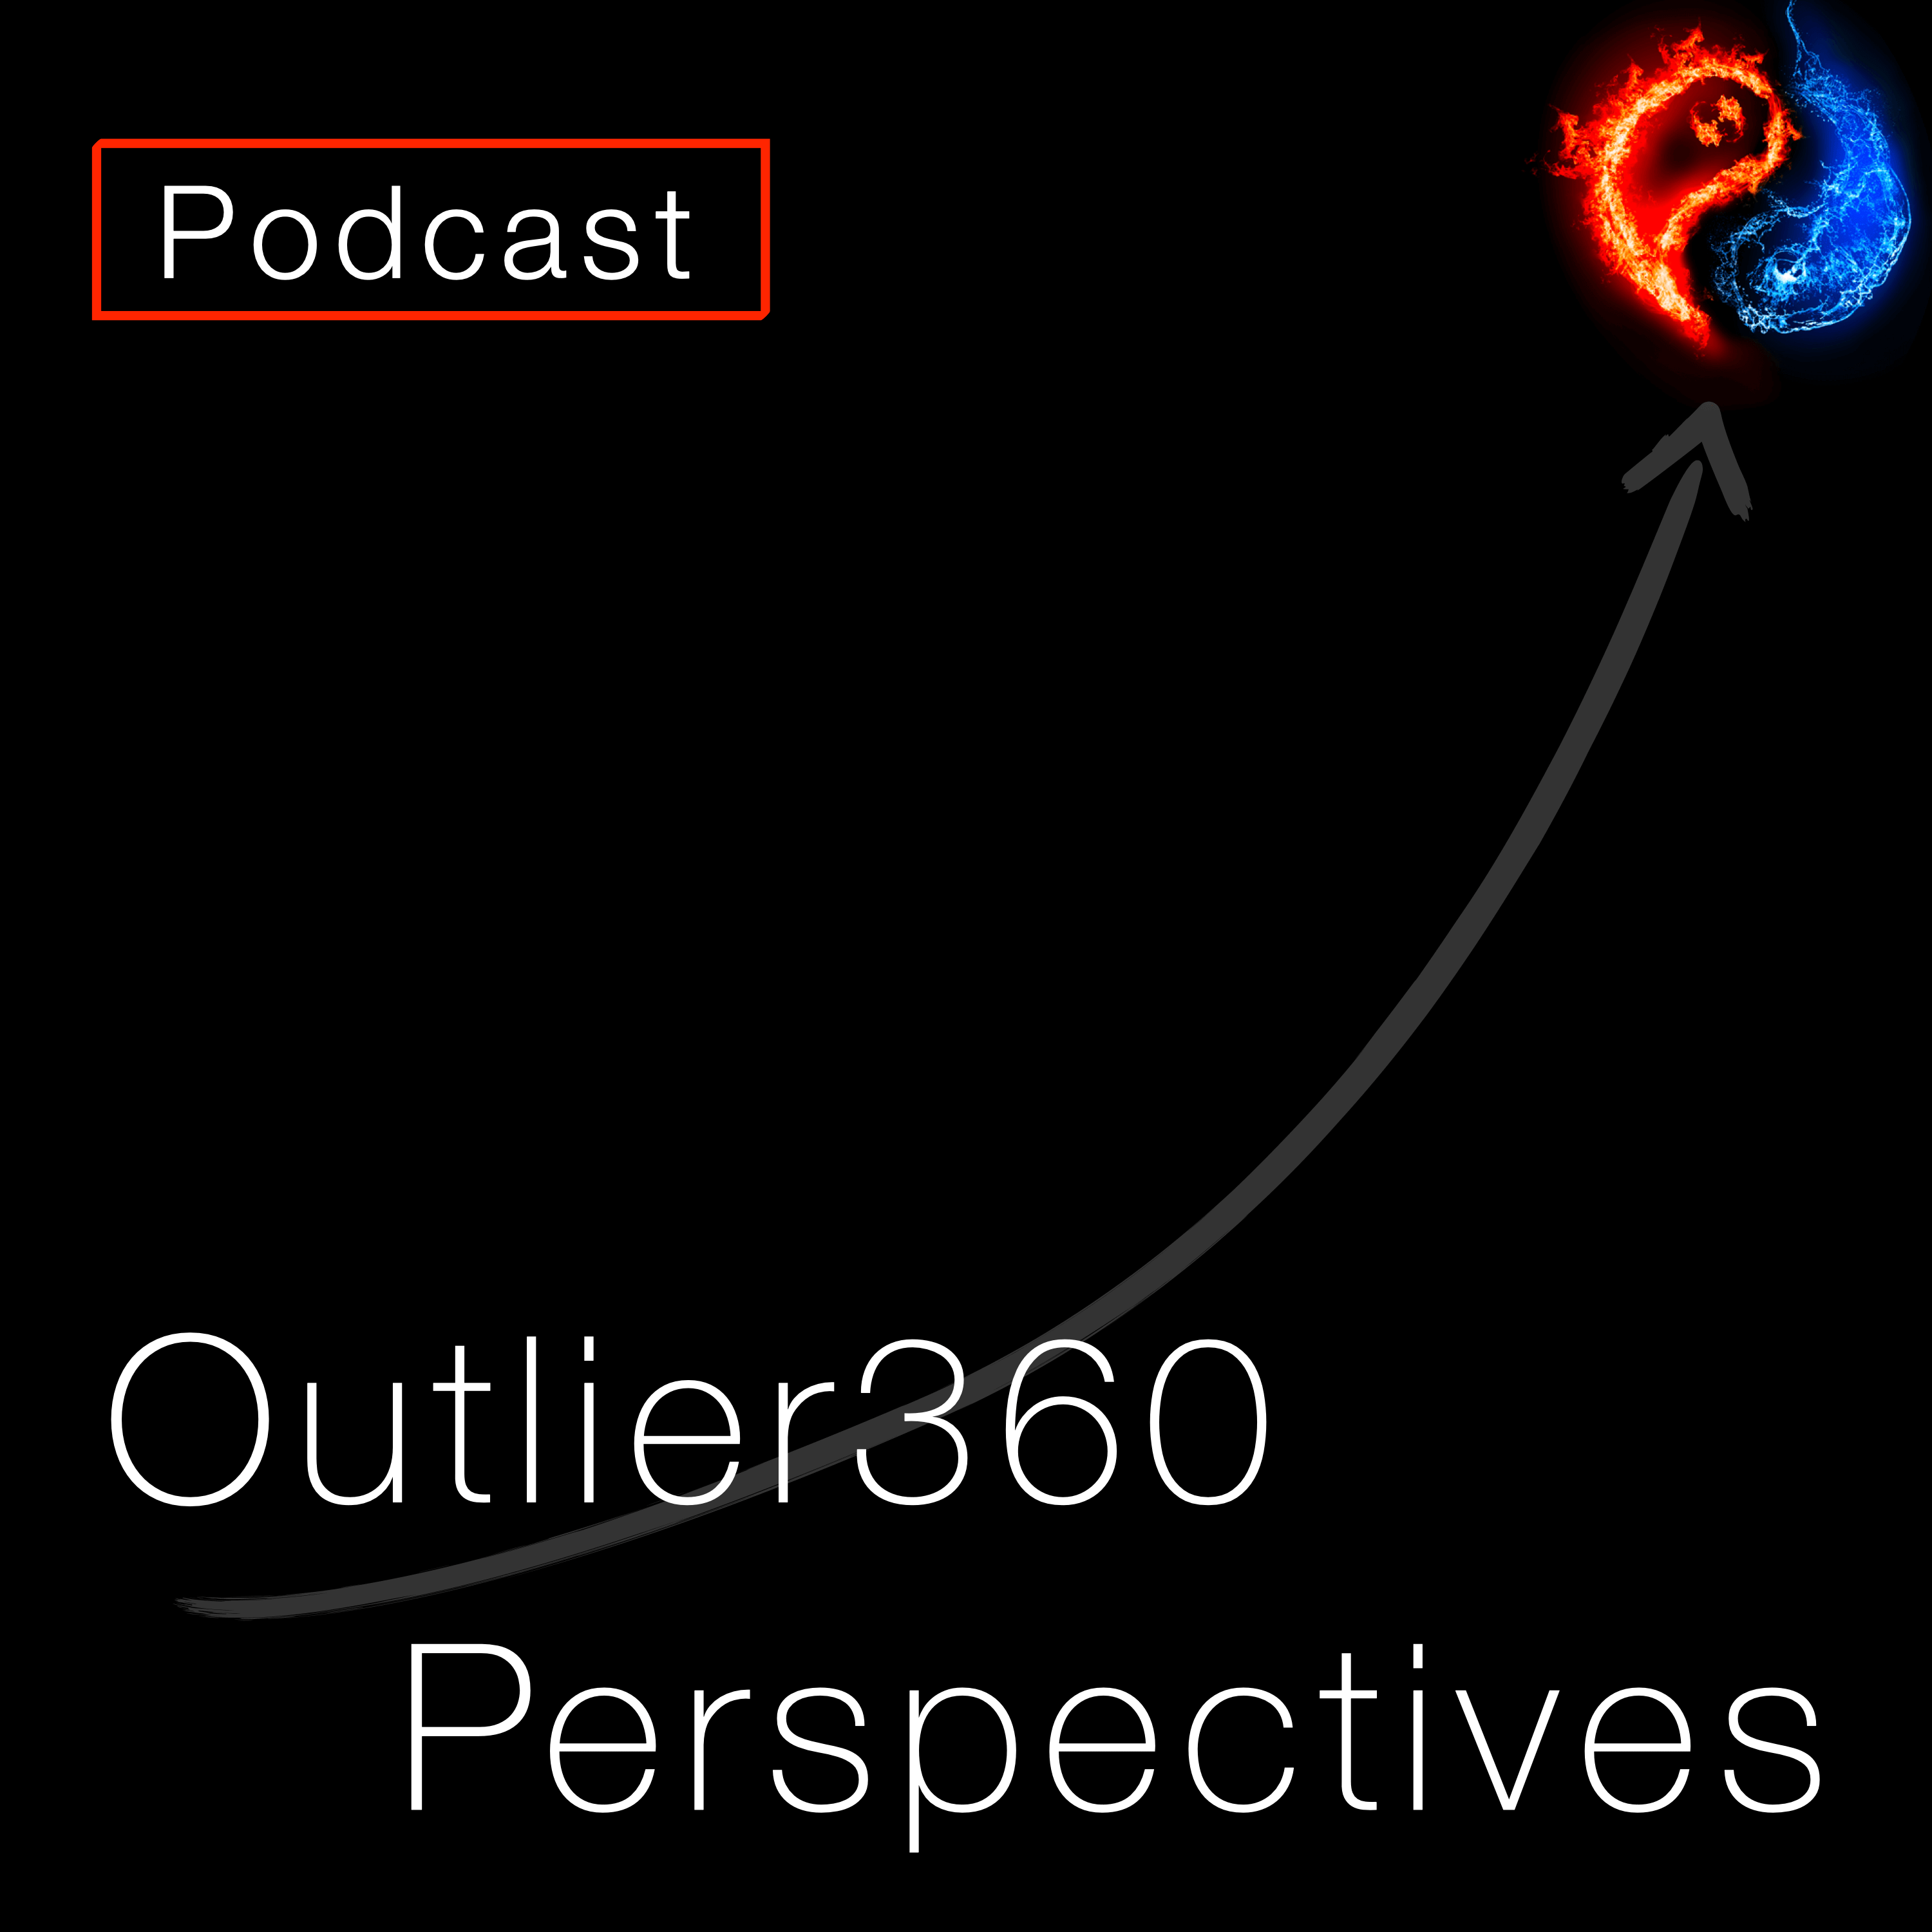 Outlier360 Perspectives Podcast Intro